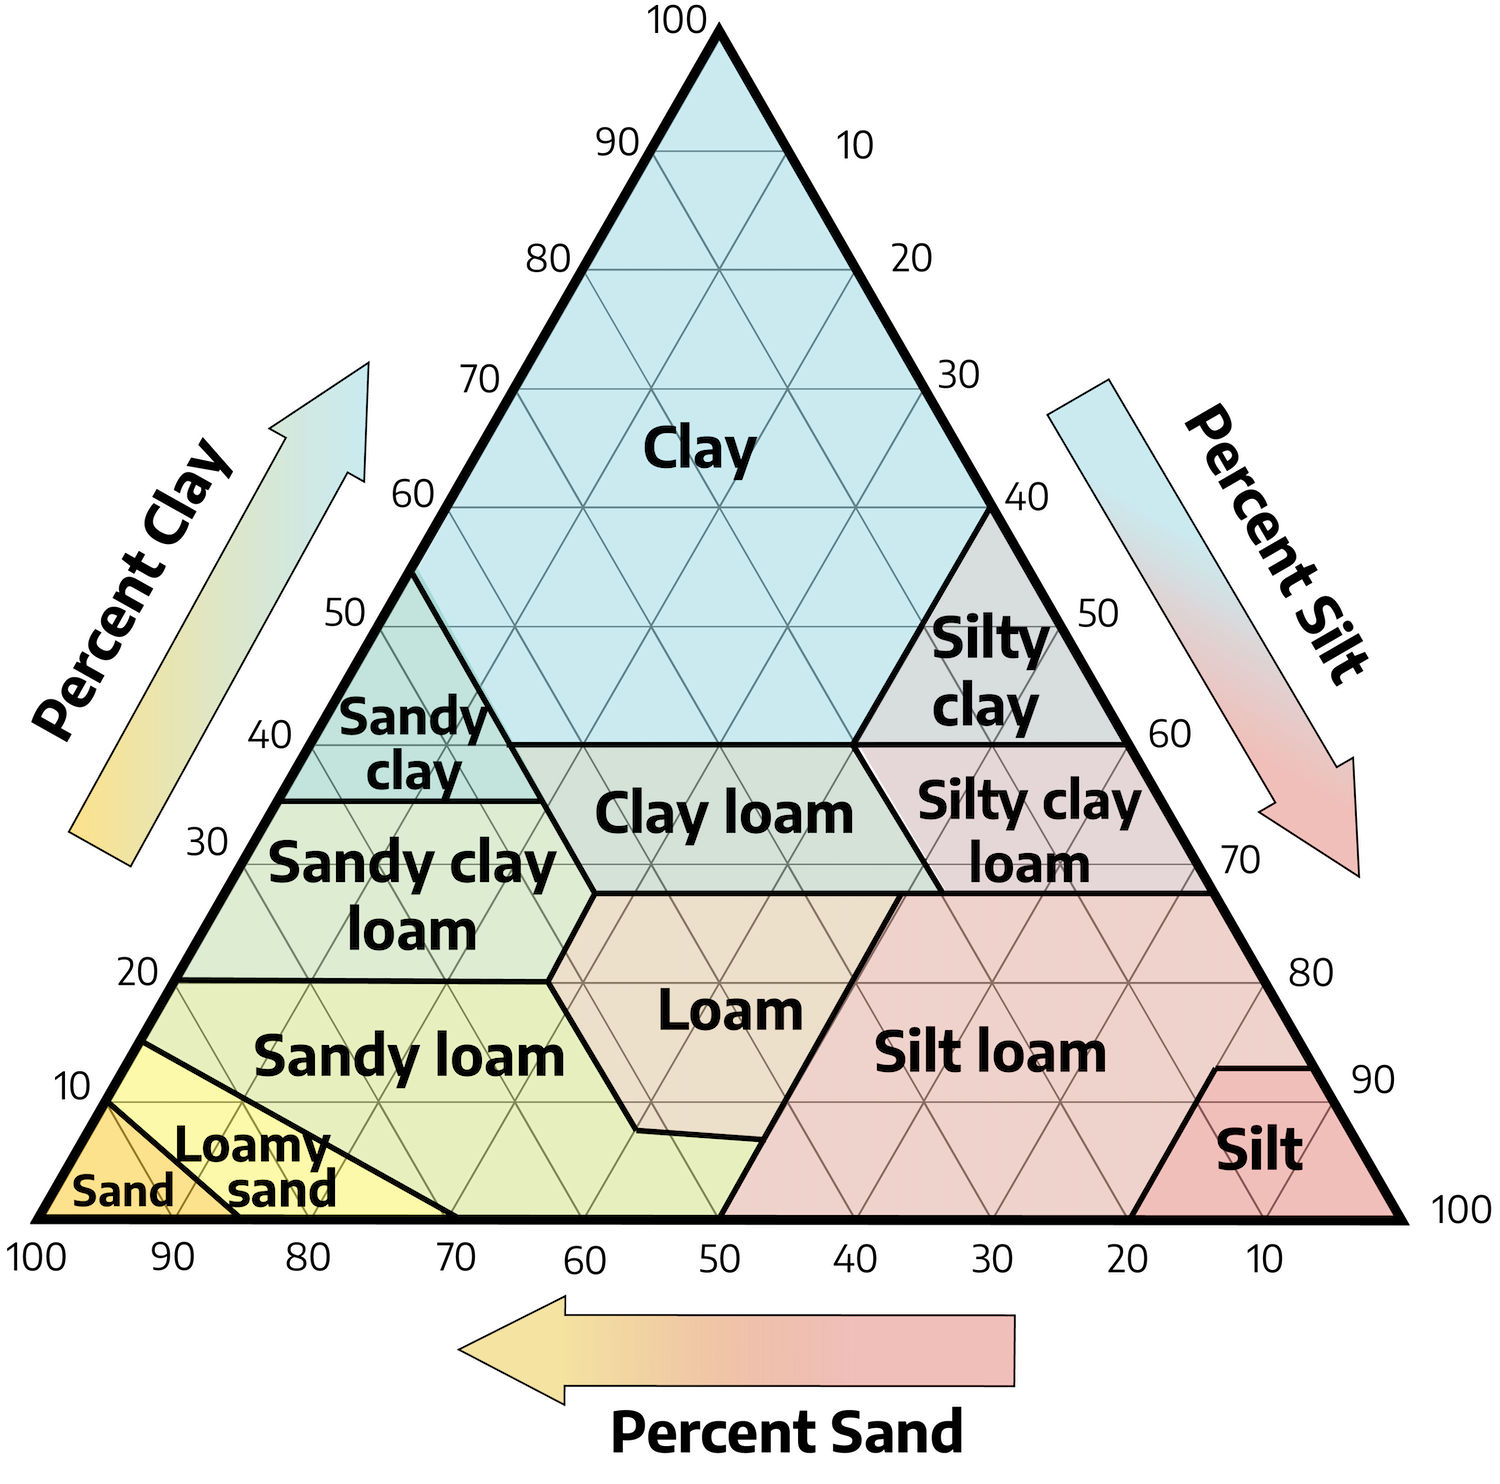 A traingular diagram showing the soil textures, the three sides are percent sand, percent clay, and percent silt. Percent silt declines from clay to sand along the right side; percent sand declines from right to left along the bottom; percent clay declines from sand to clay along the left side. Inside, the triangle is divided into soil texture types with clay at the top (mix of clay and silt), sandy clay, silty clay, clay loam, sandy clay loam, silty clay loam, loam (mixture of silt, clay, and sand), silt loam, sandy loam, loamy sand, sand, and silt.